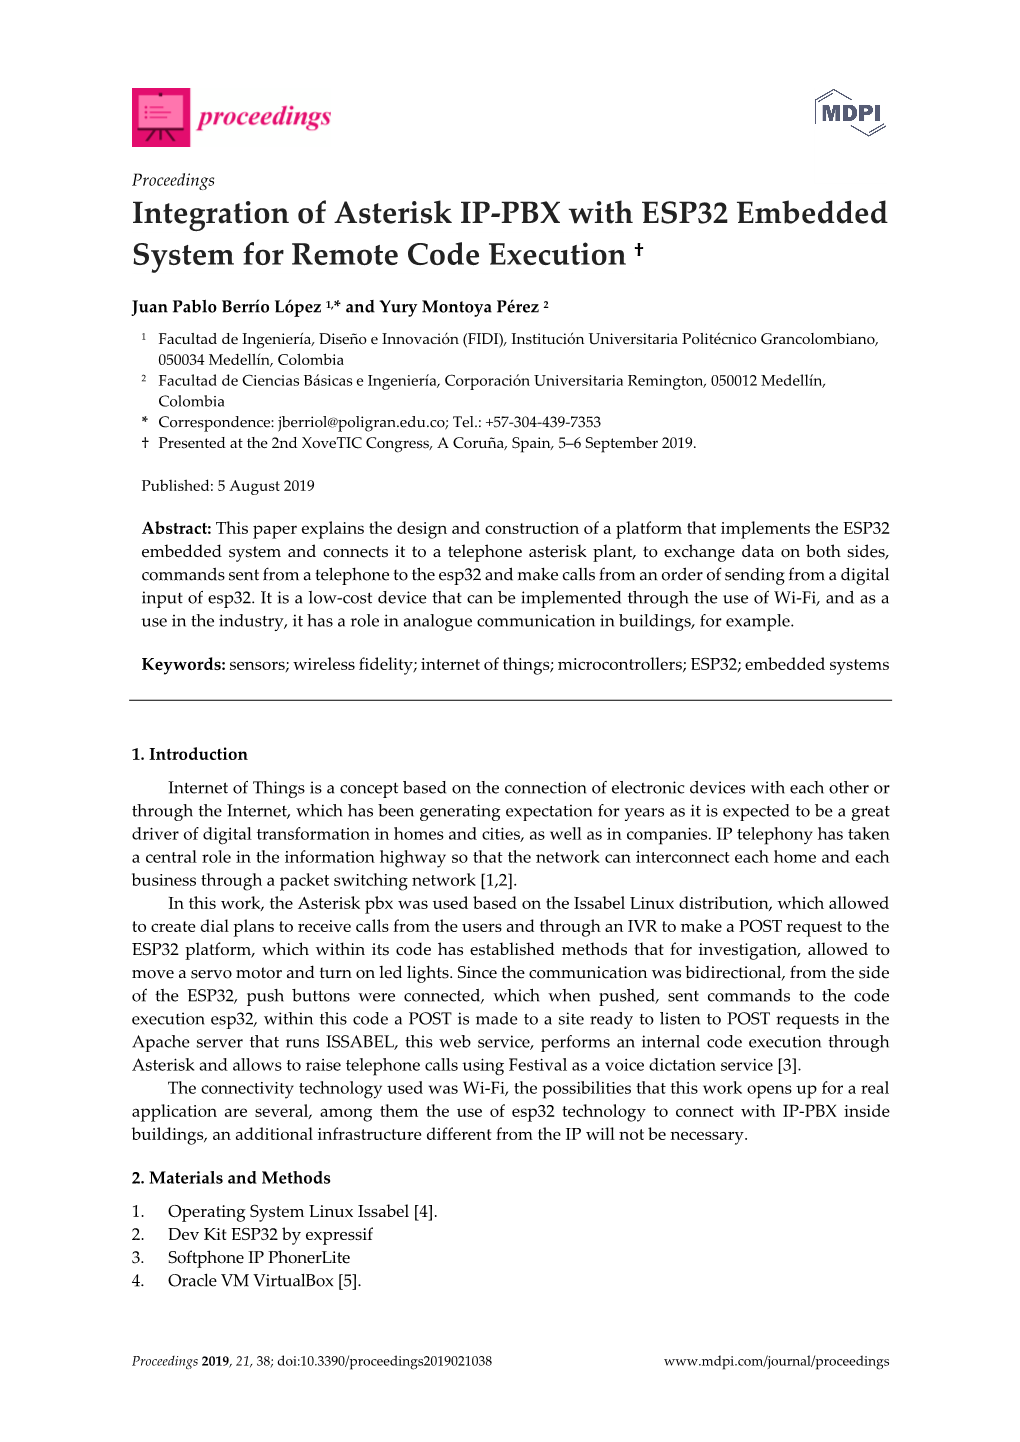 Integration of Asterisk IP-PBX with ESP32 Embedded System for Remote Code Execution †